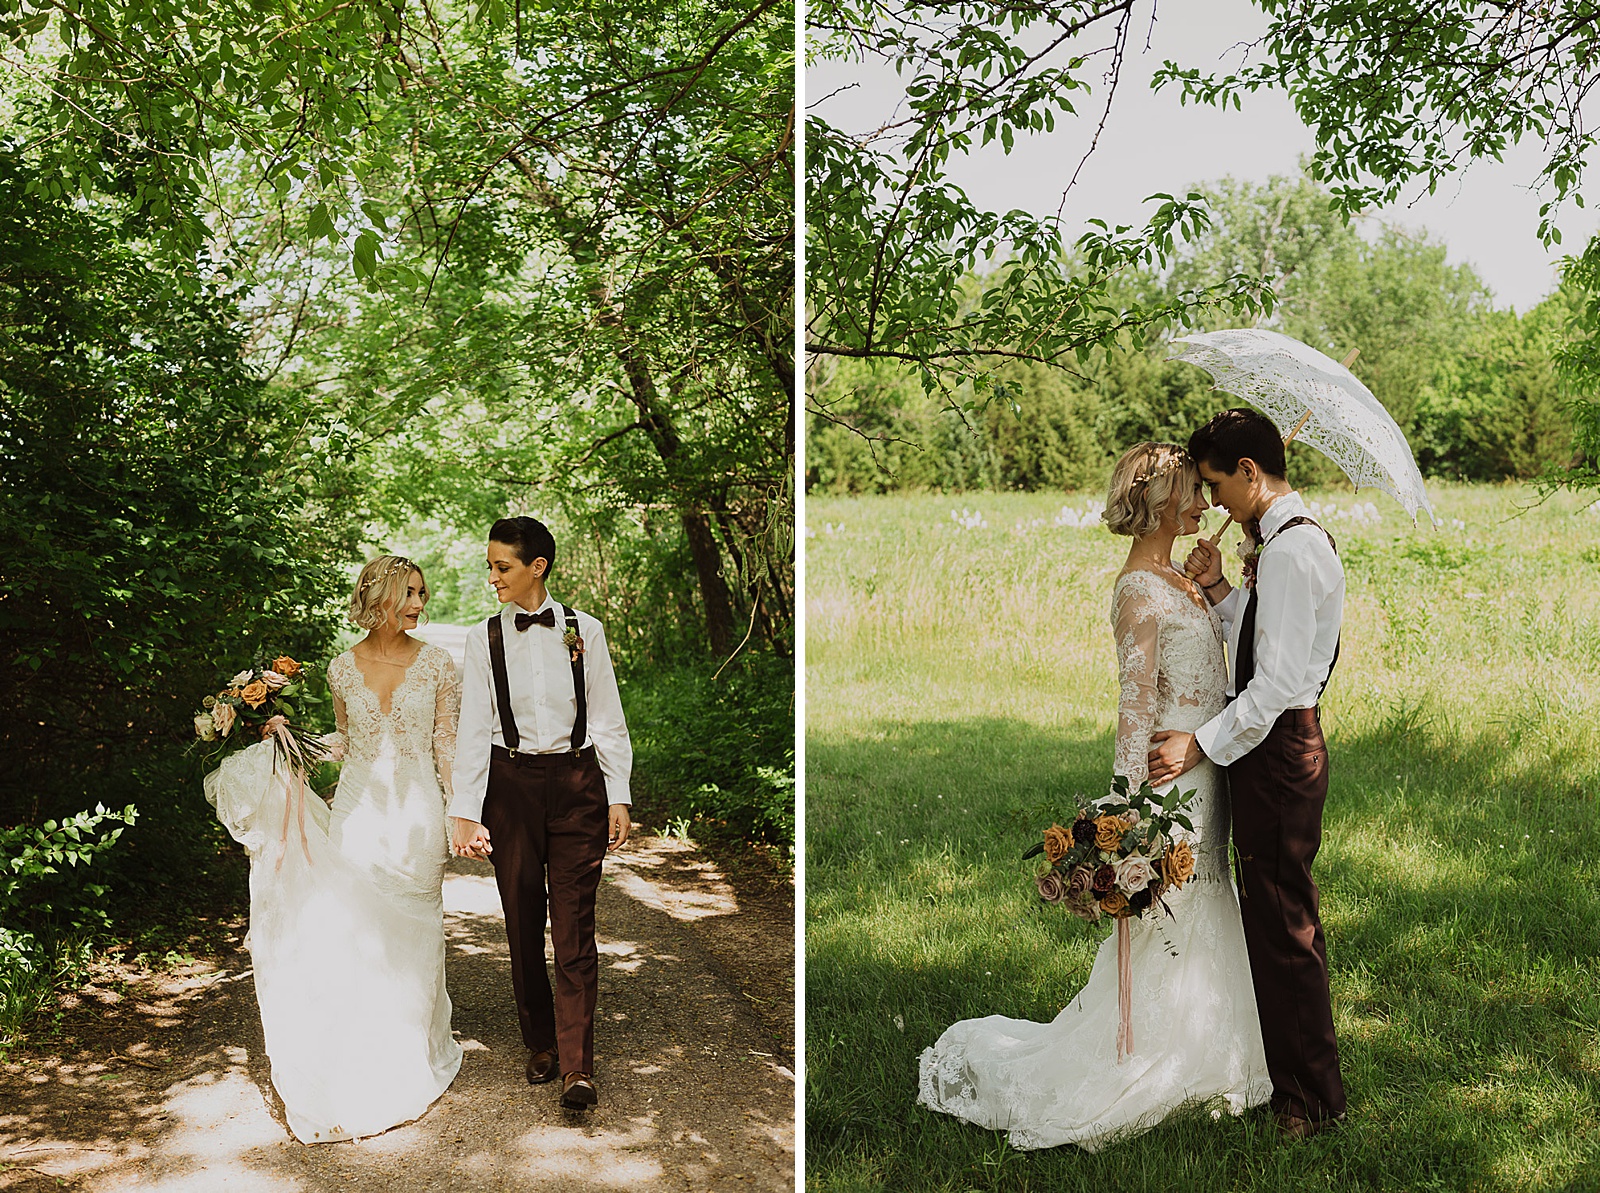 Newlywed Portraits Boho Kansas City Styled Elopement captured by Caitlyn Cloud Photography